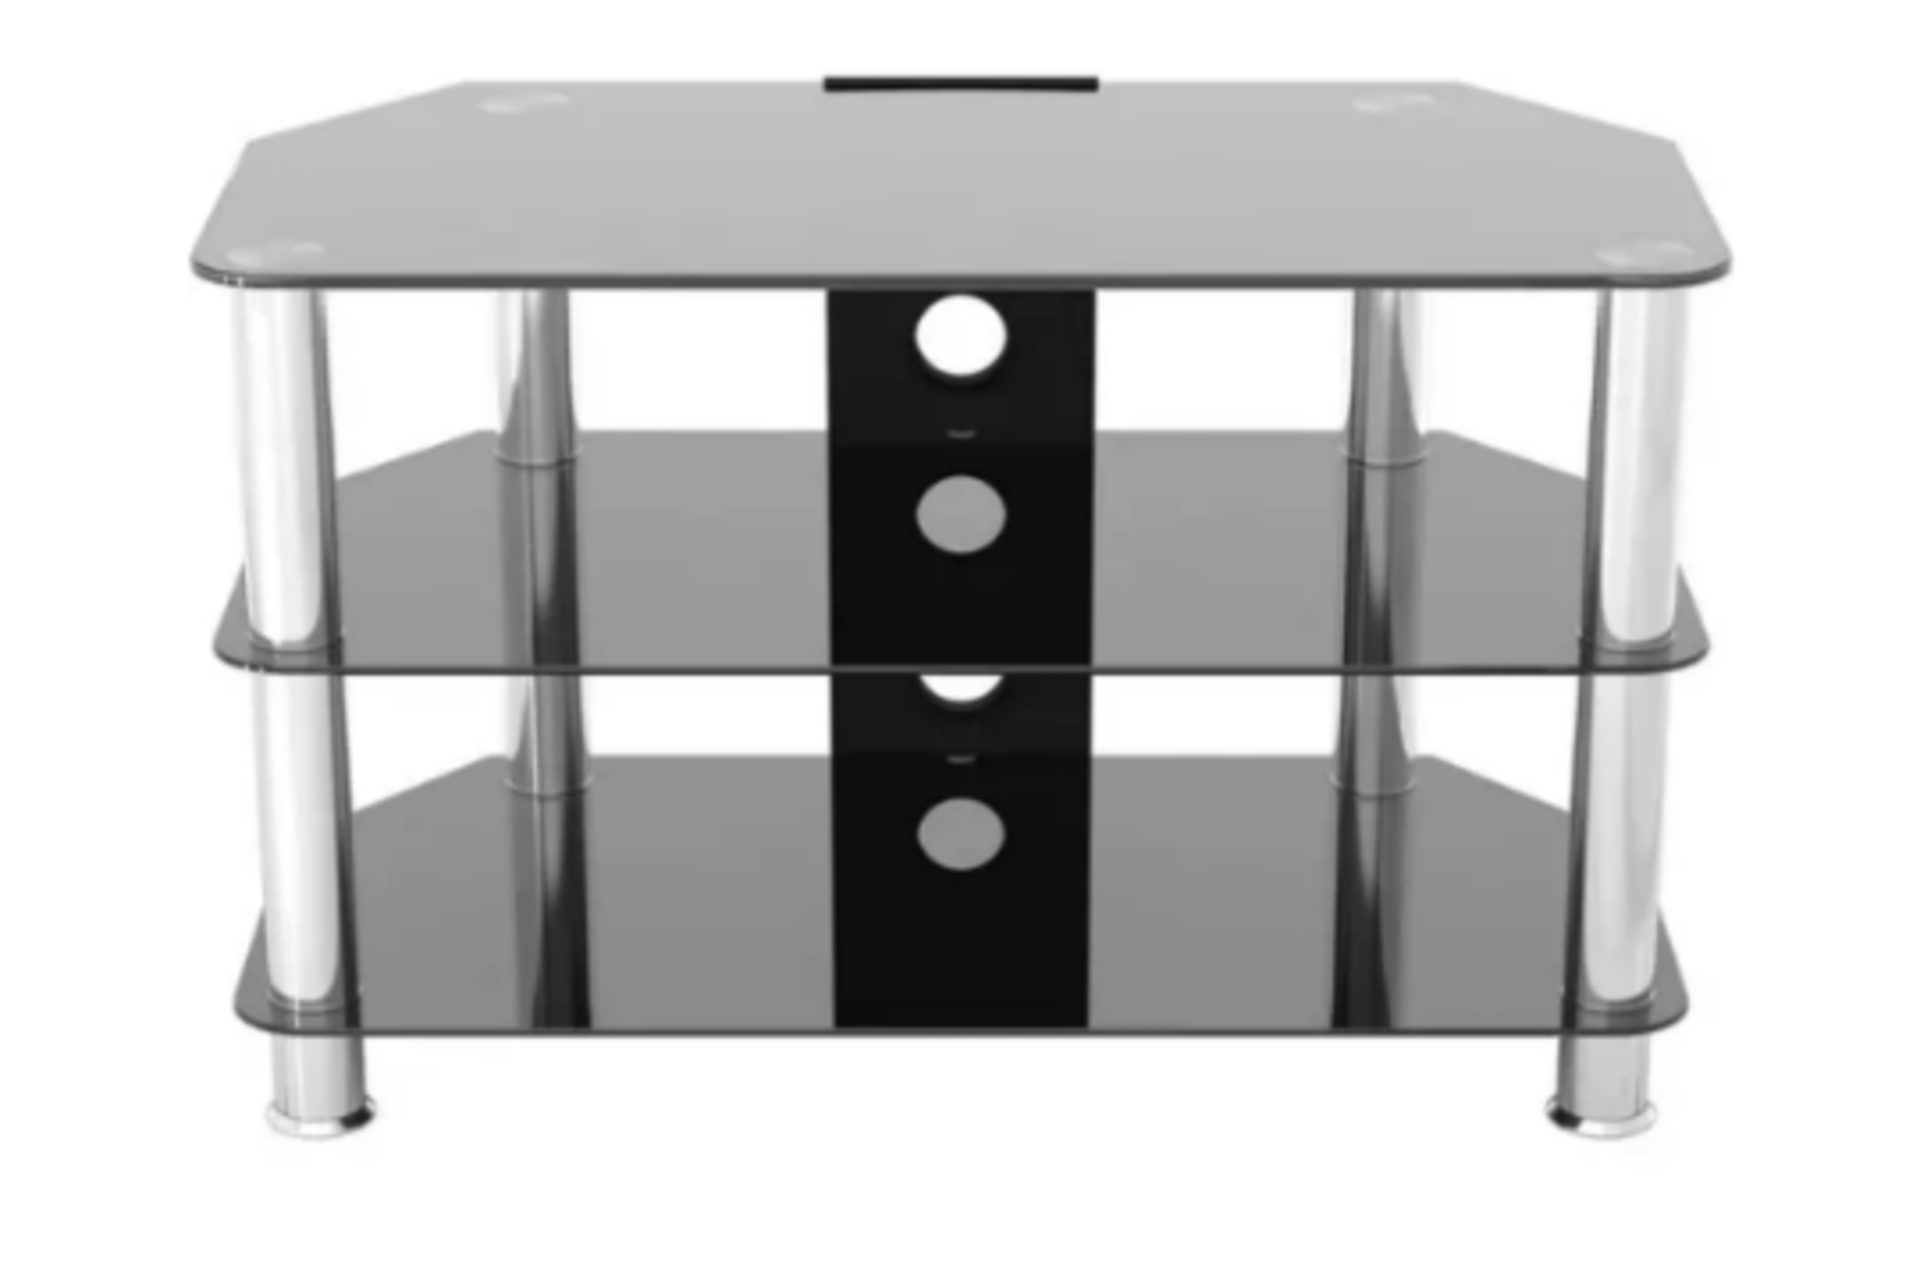 TRADE LOT 10 x NEW LIVING GLASS TV STANDS. BLACK TEMPERED GLASS WITH STAINLESS STEEL LEGS. EASY TO - Image 2 of 5